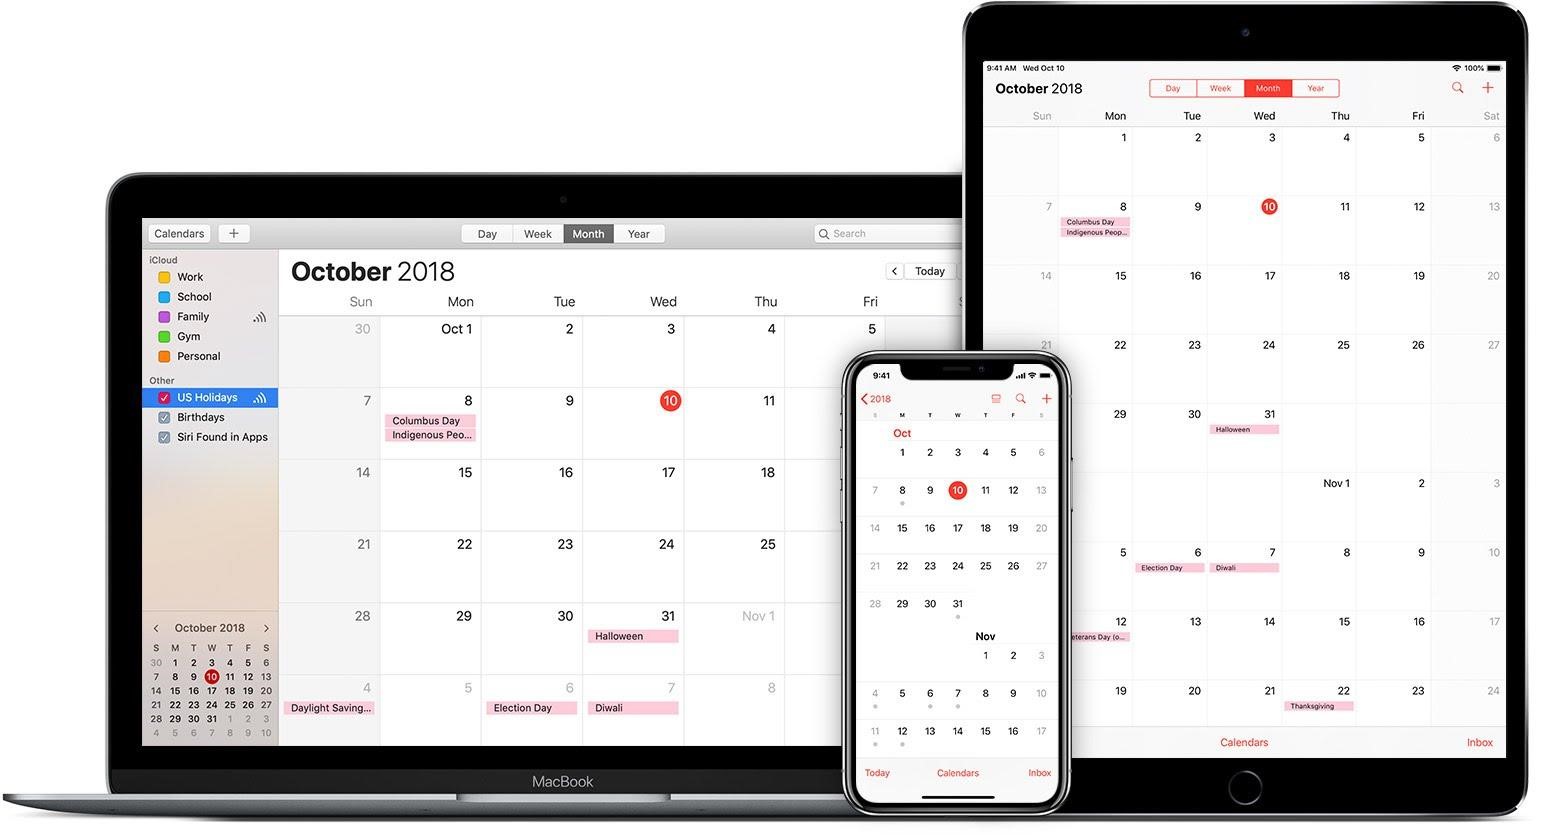 outlook for mac calendar sync with ical